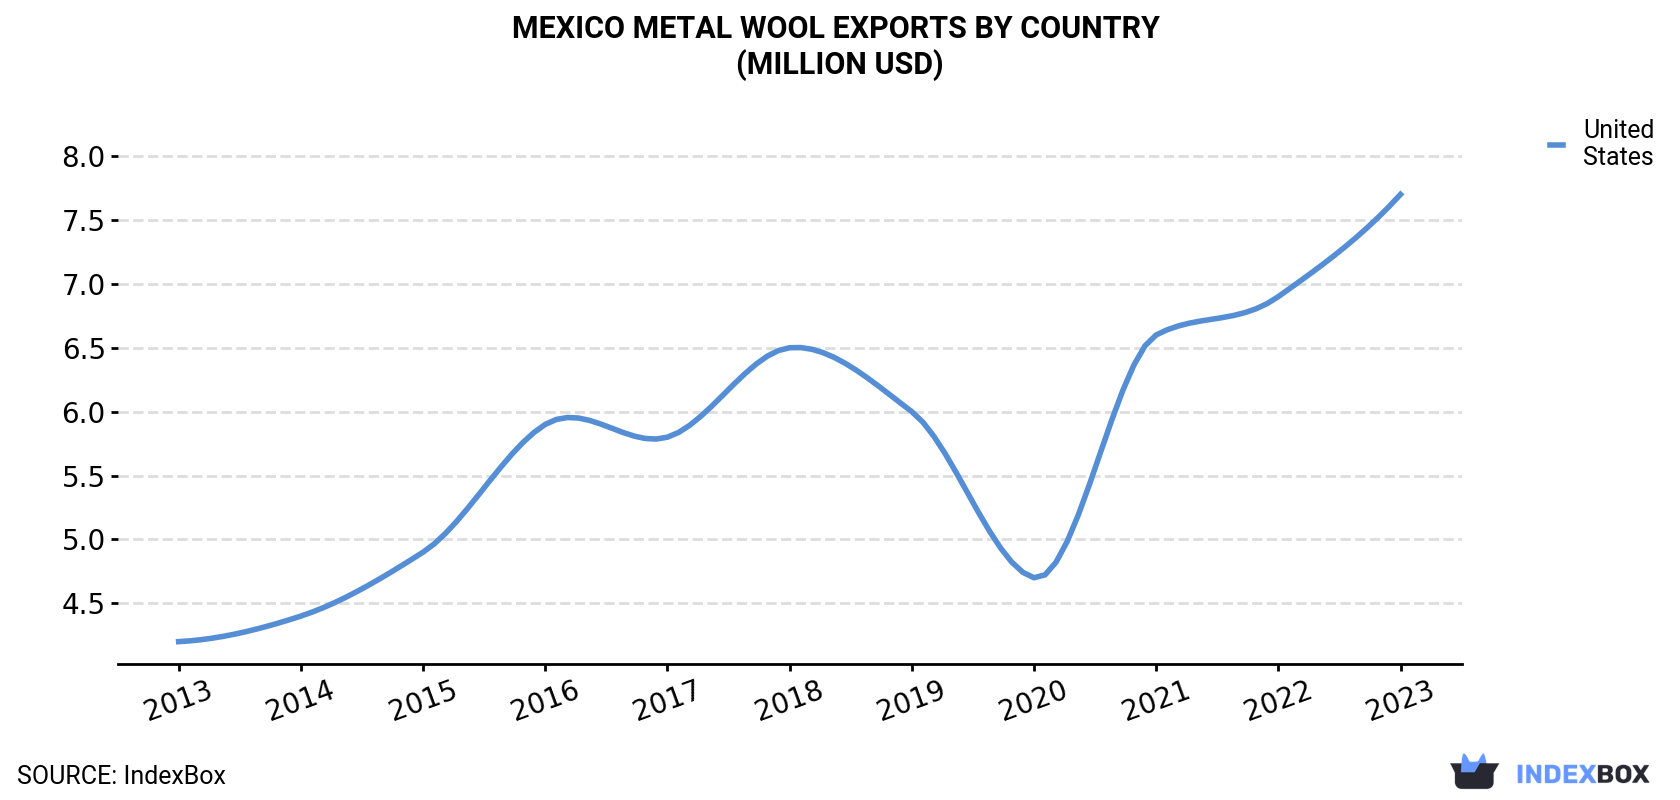 Mexico Metal Wool Exports By Country (Million USD)